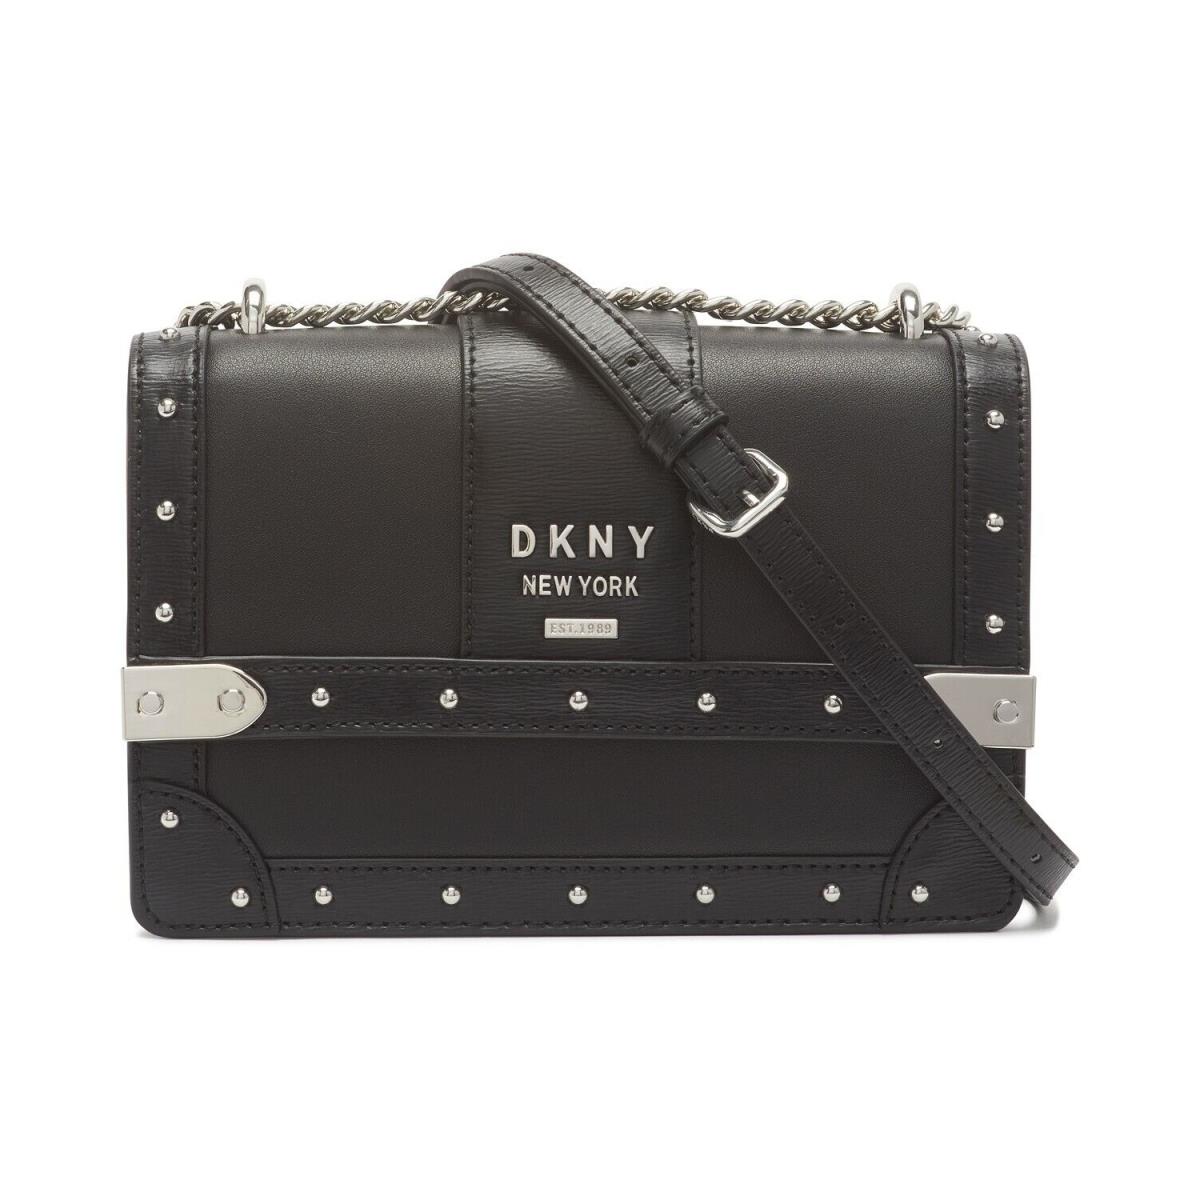 Dkny York Black Leather Studded Louise Small Shoulder Flap Flap - Handle/Strap: Black leather with Silver Chain metal, Hardware: Silver, Exterior: Black